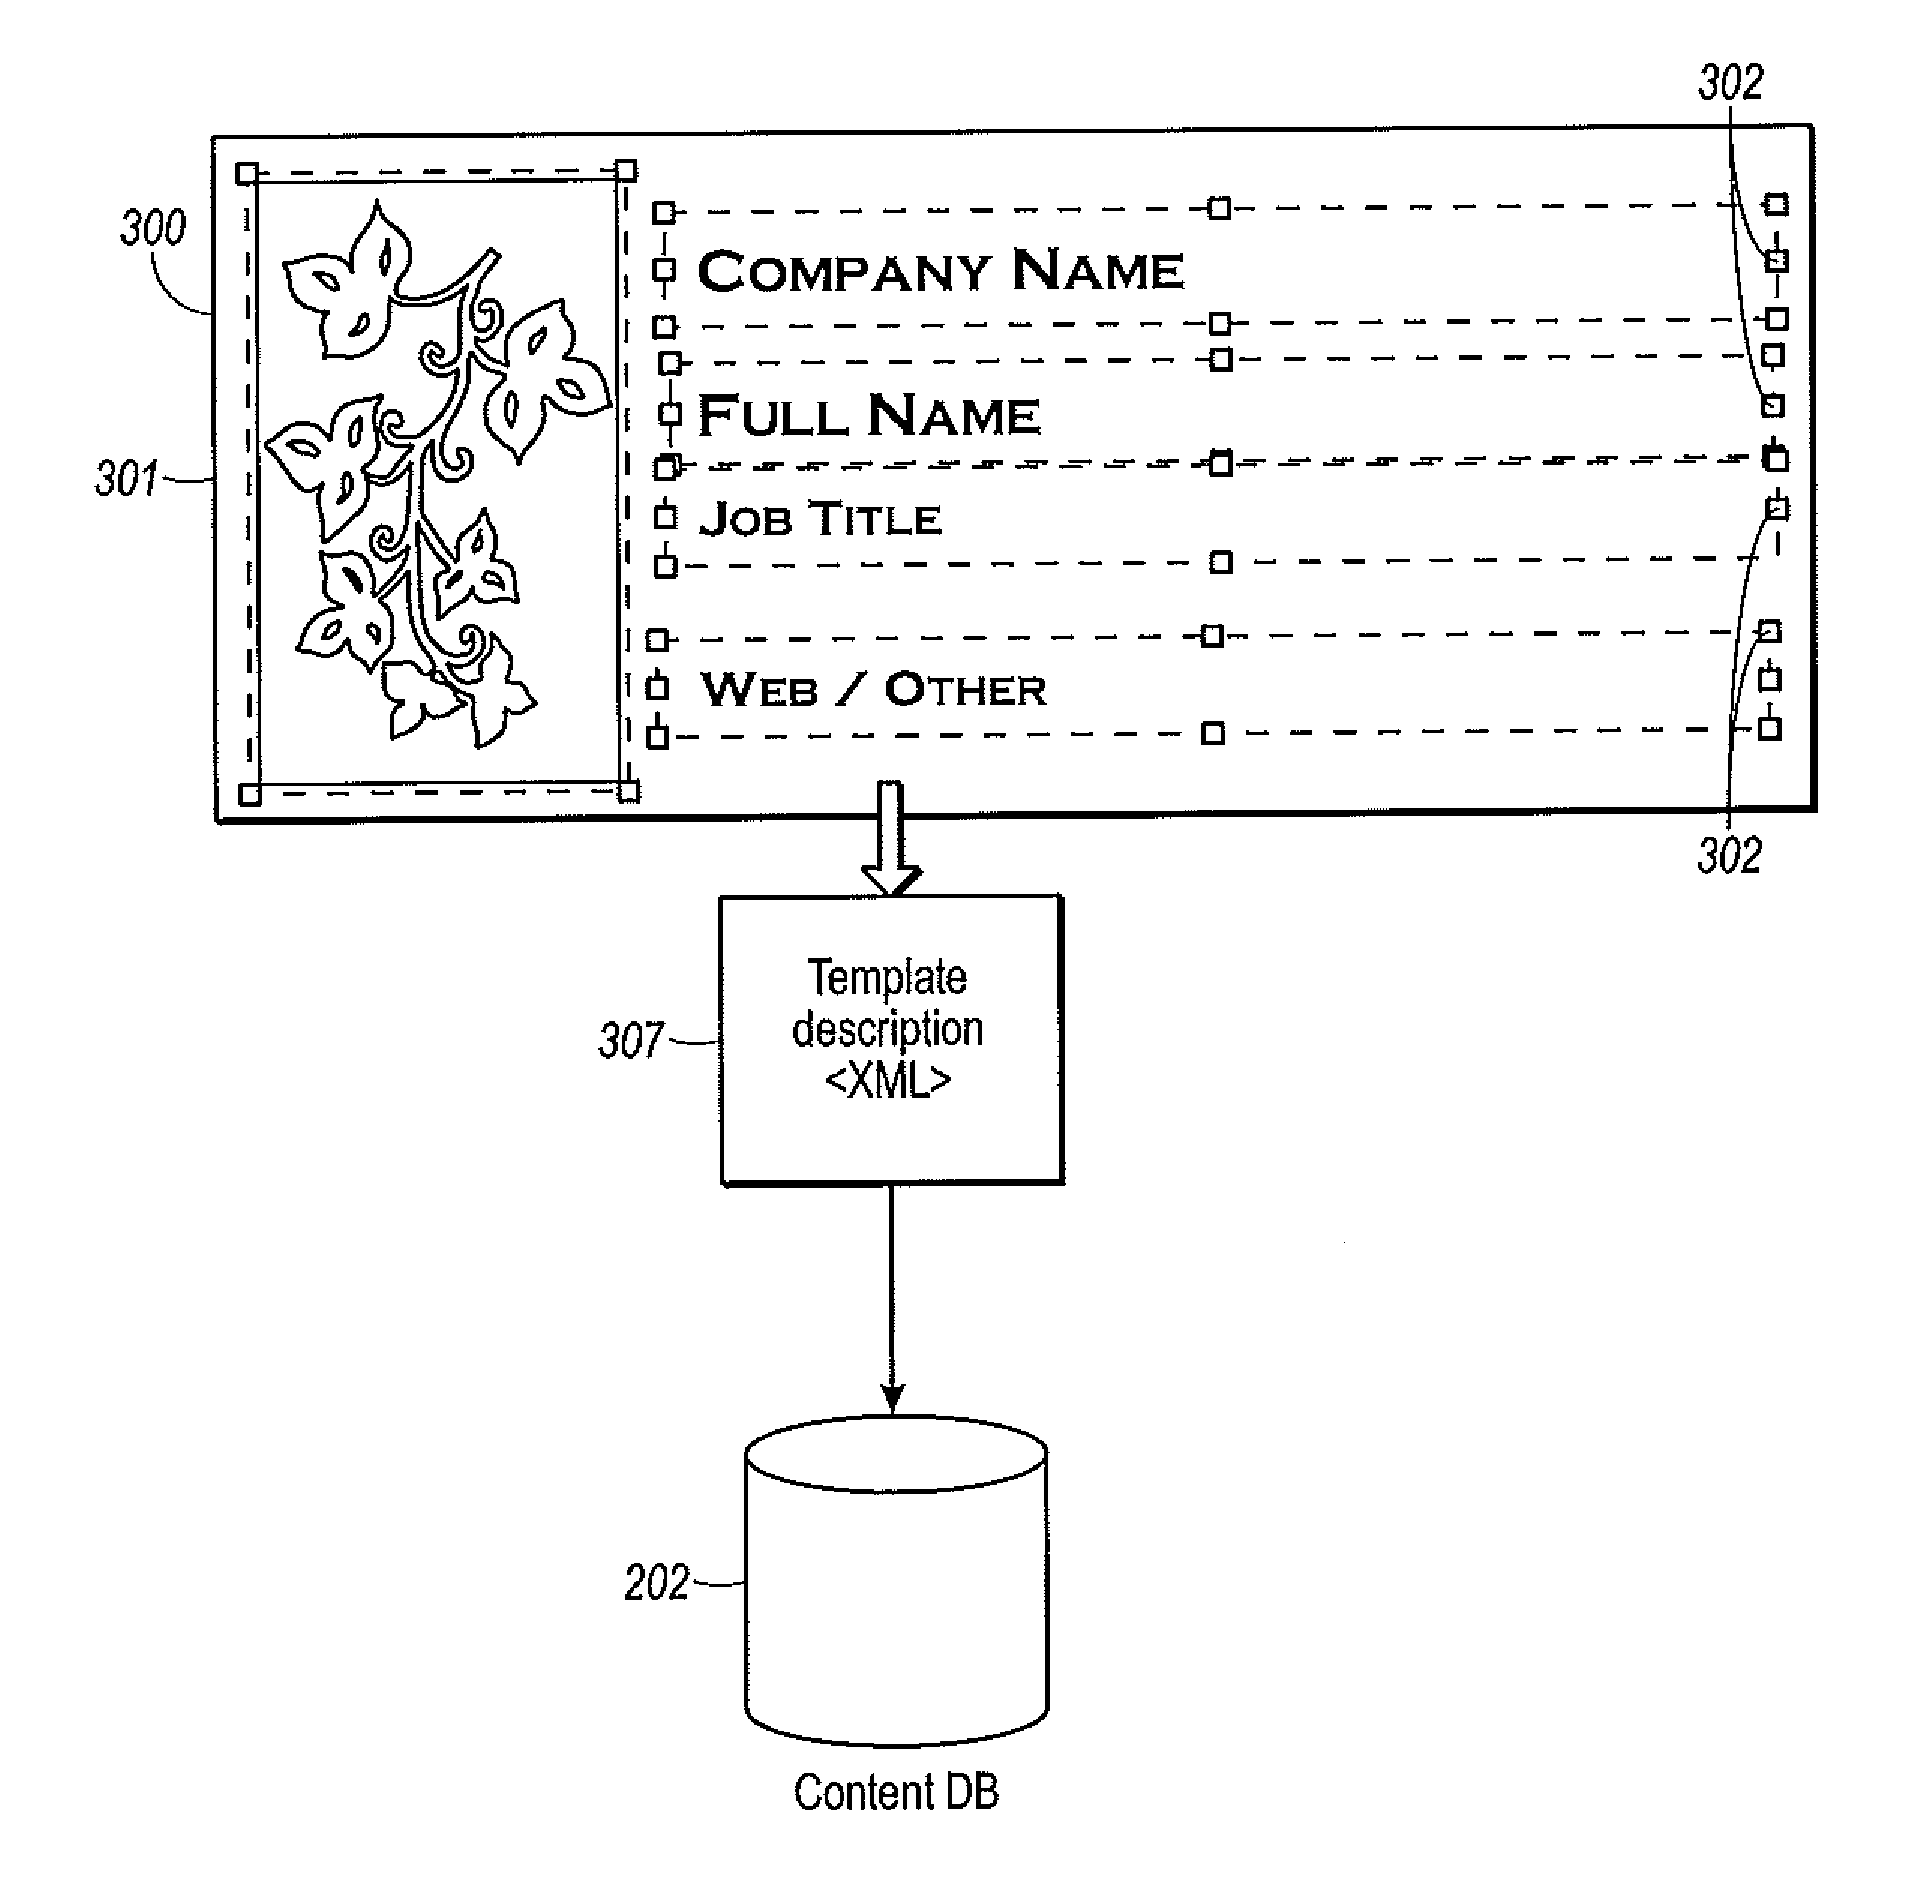 Method and system for mass production of customized engraved products